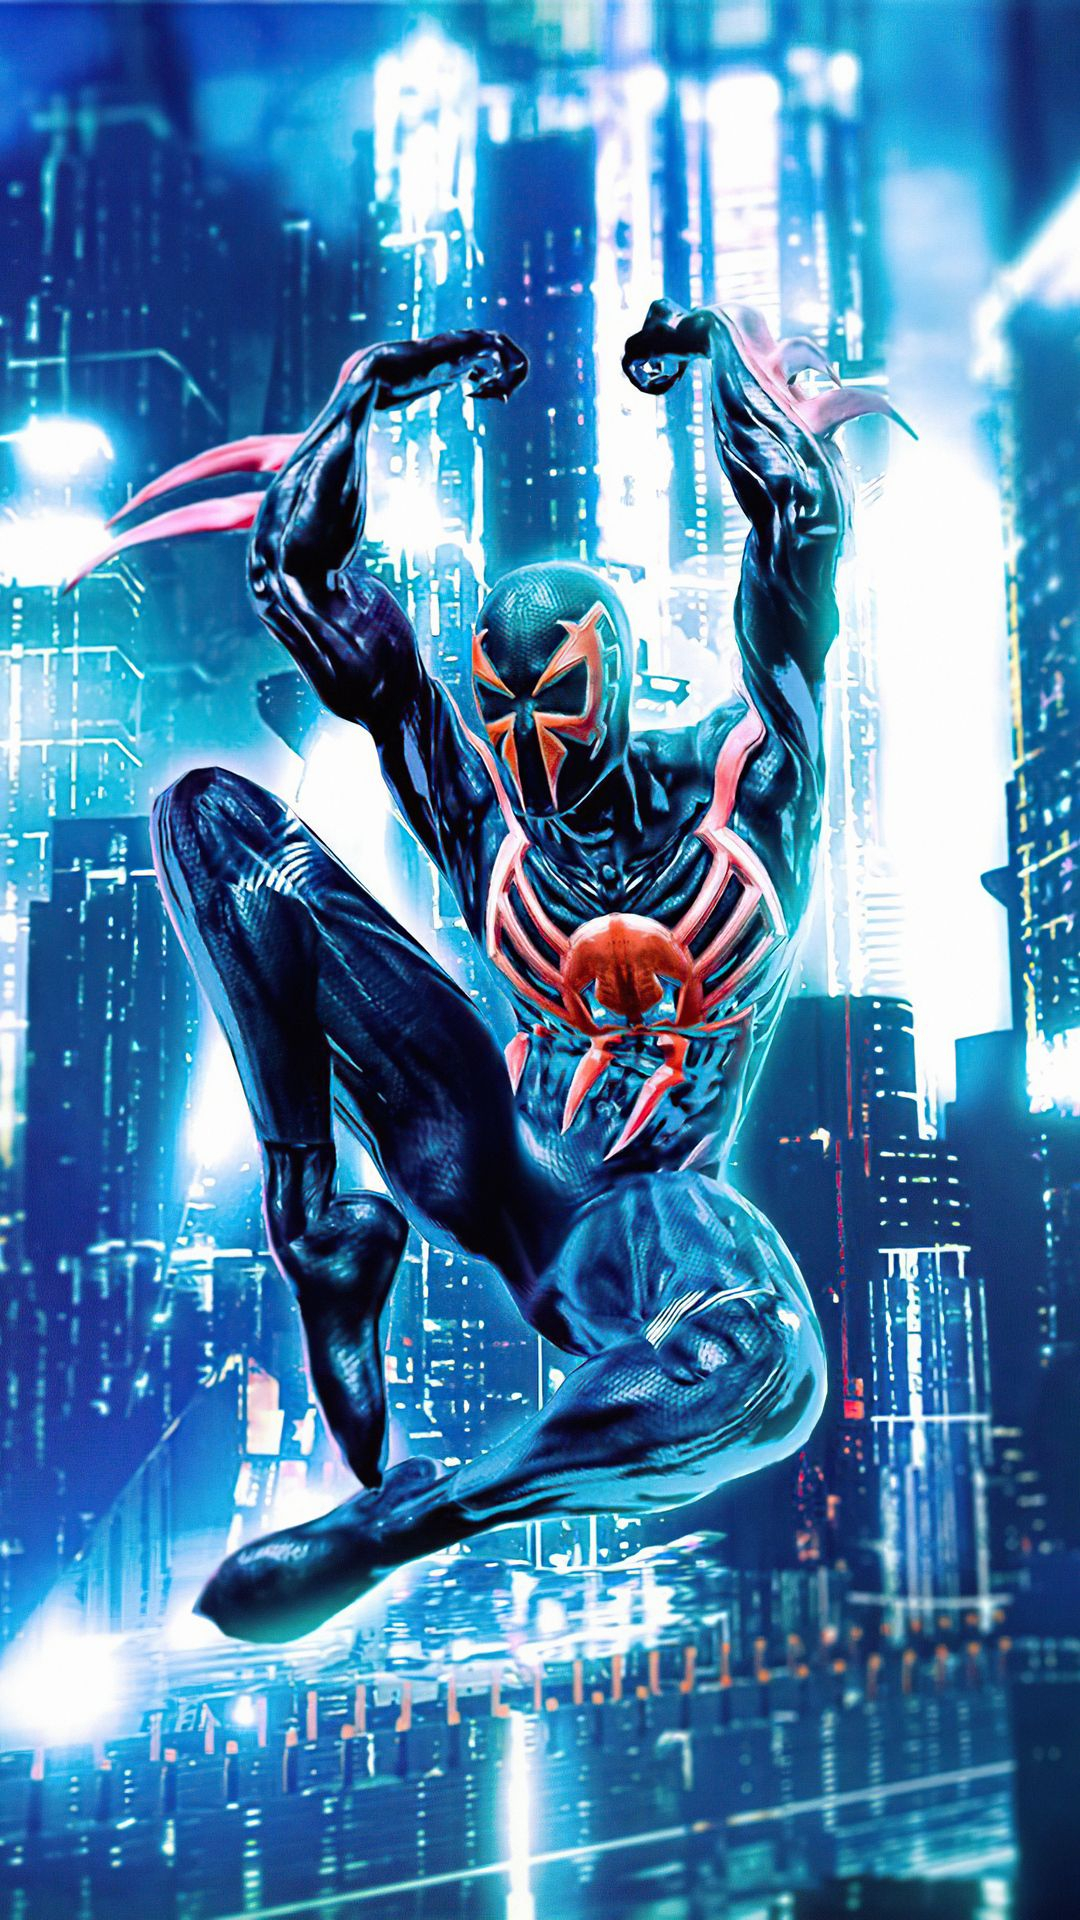 1080x1920 Spider Man 2099 Wallpapers Top 20 Free Spider Man 2099 Backgrounds, Images \u0026 Photos